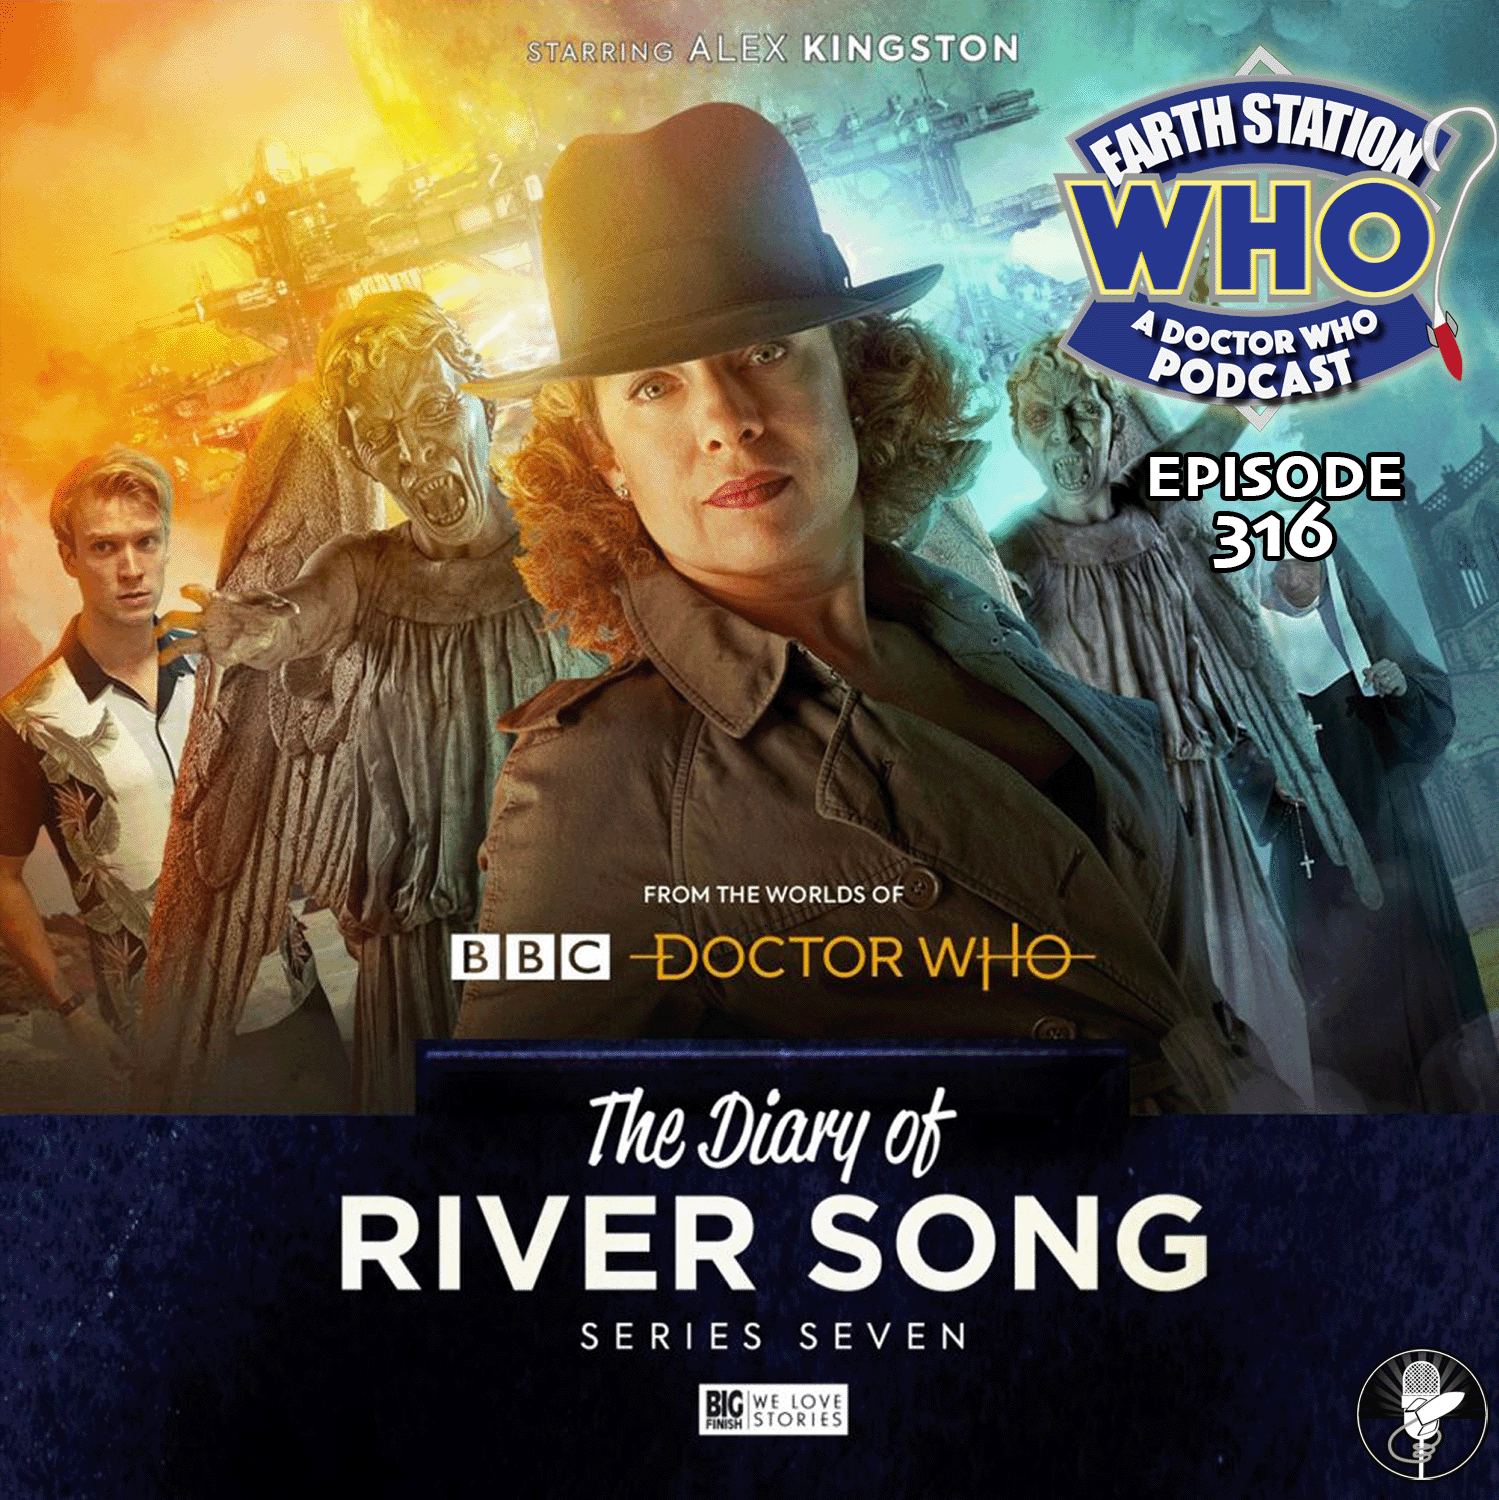 Earth Station Who Ep 316 - The Diary of River Song Vol 7